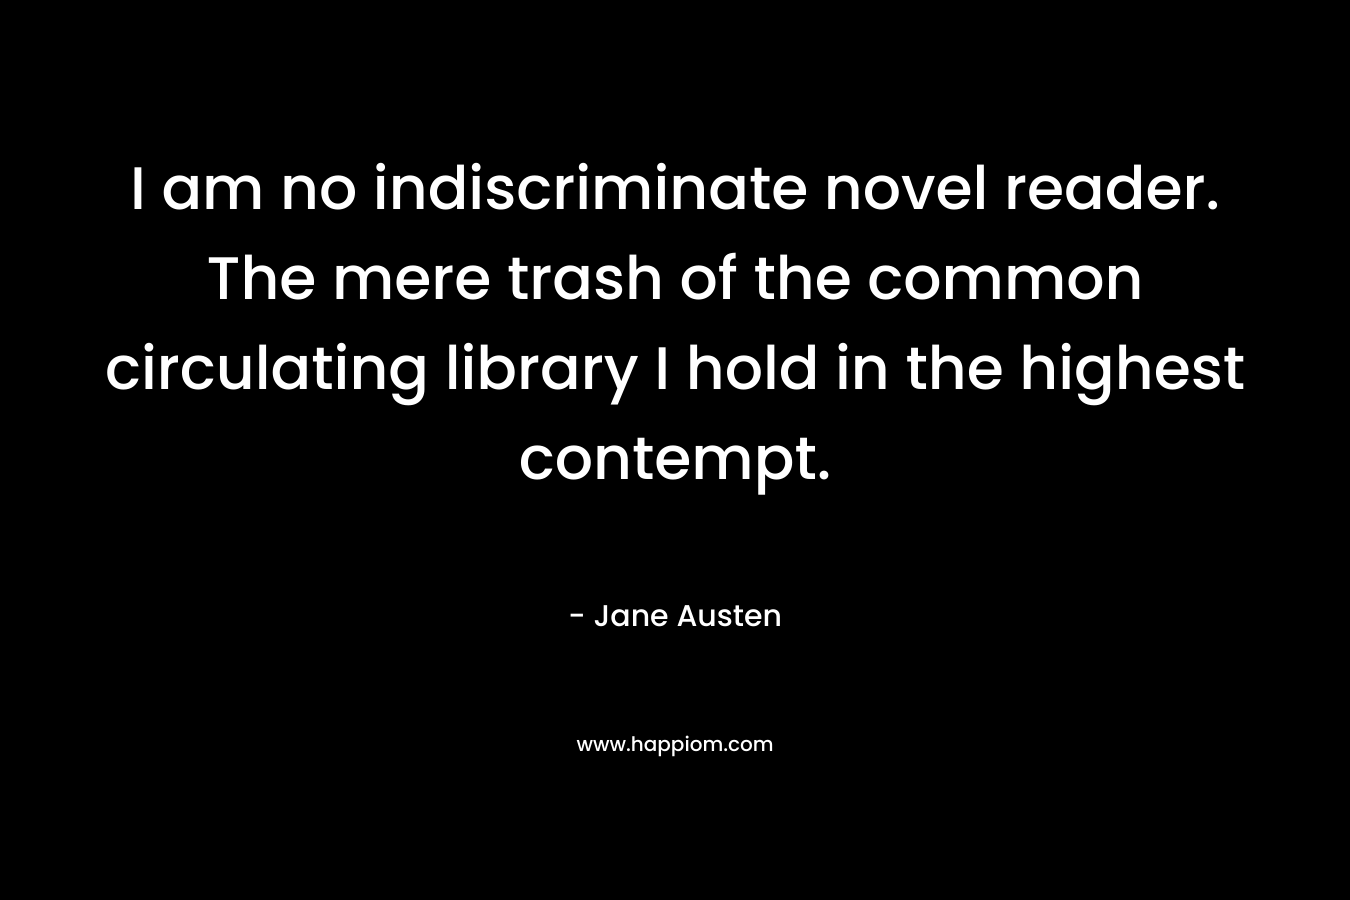 I am no indiscriminate novel reader. The mere trash of the common circulating library I hold in the highest contempt. – Jane Austen